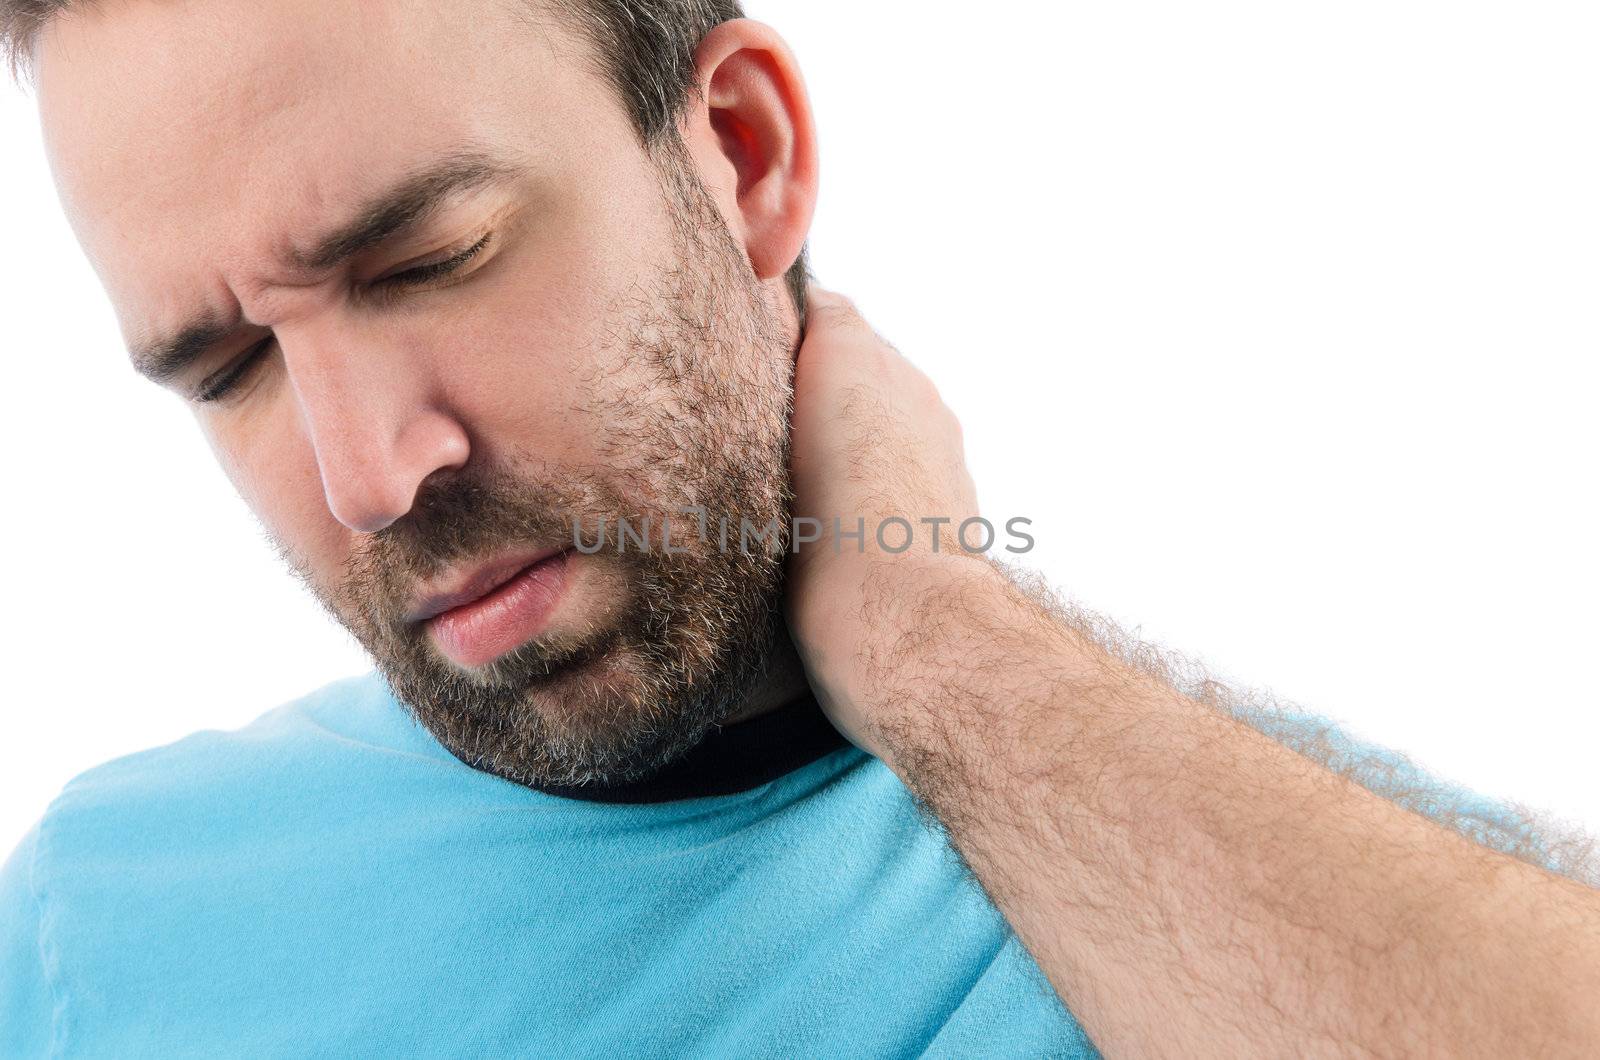 A bearded man holding his injured neck, isolated on a white background.